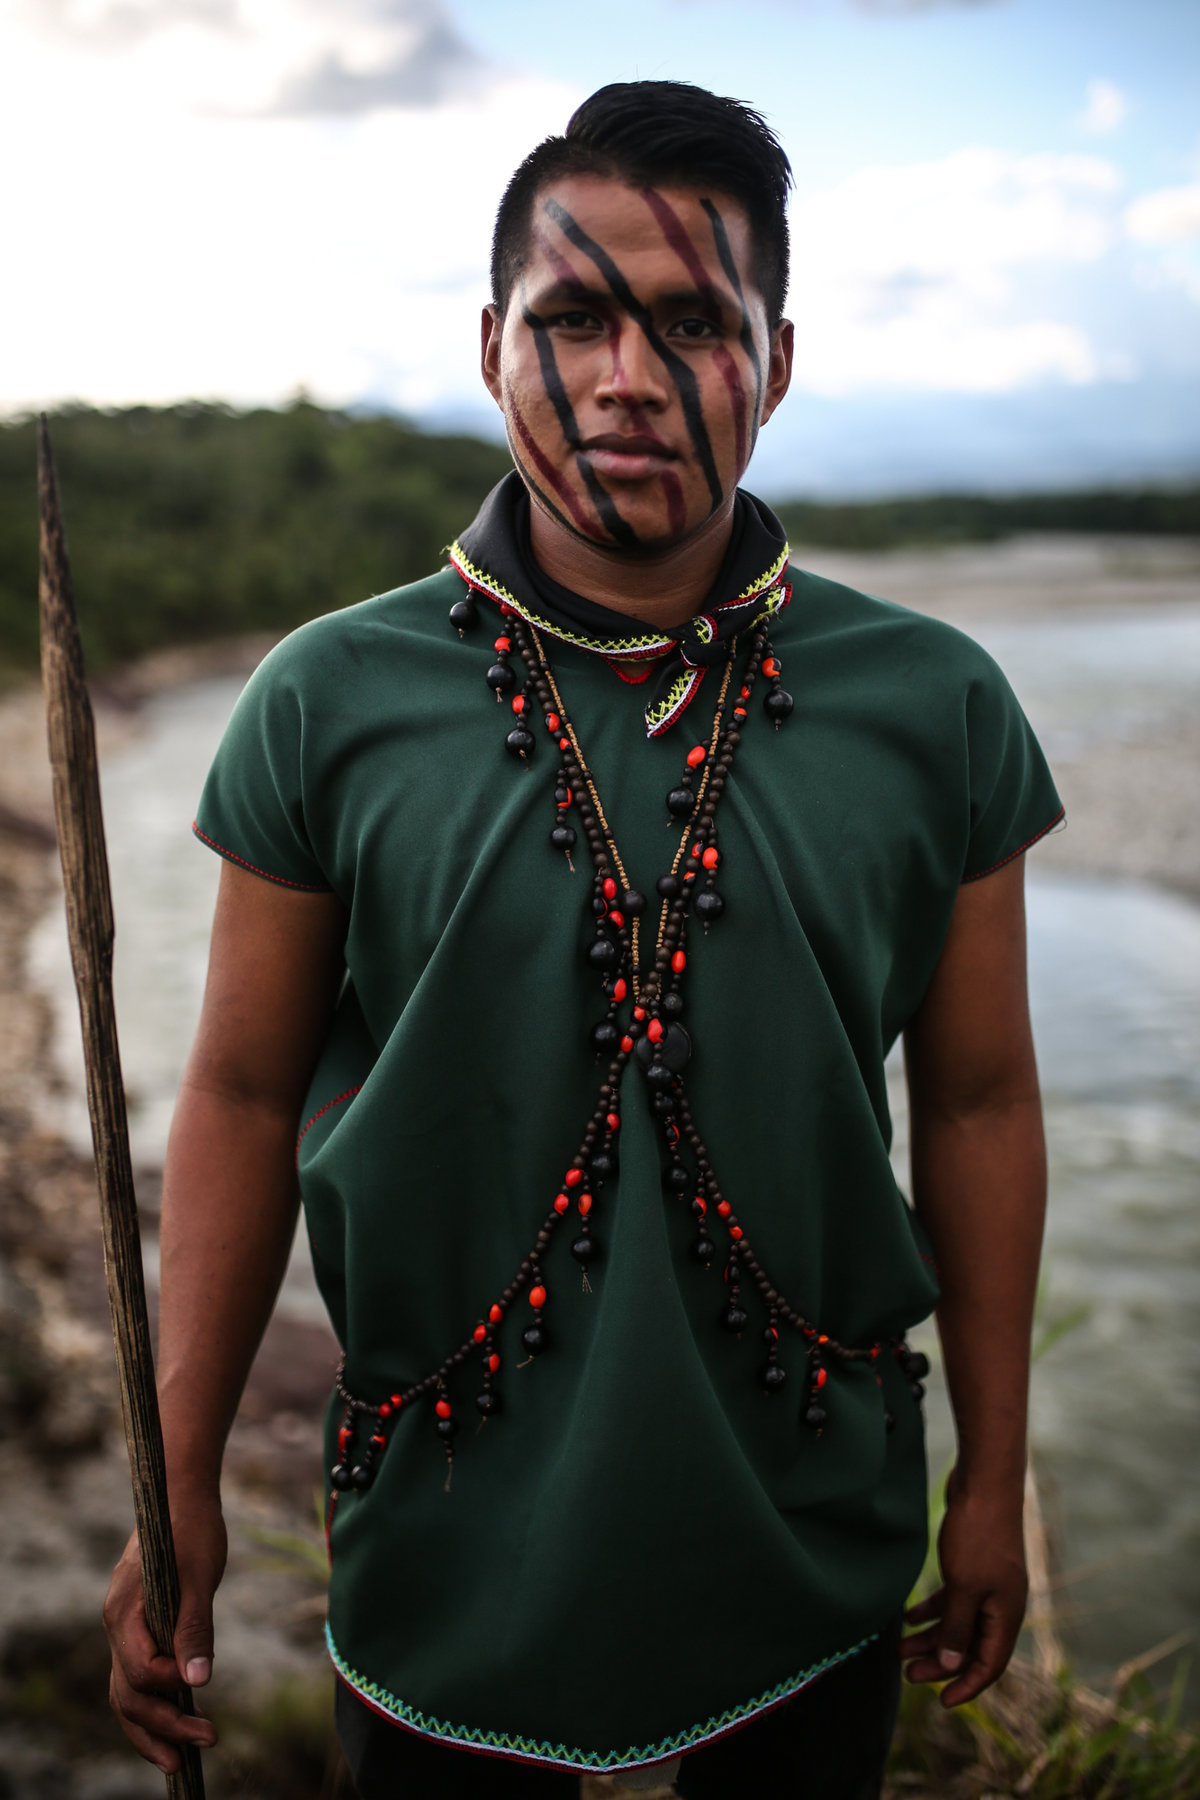 A member of the Indigenous guard